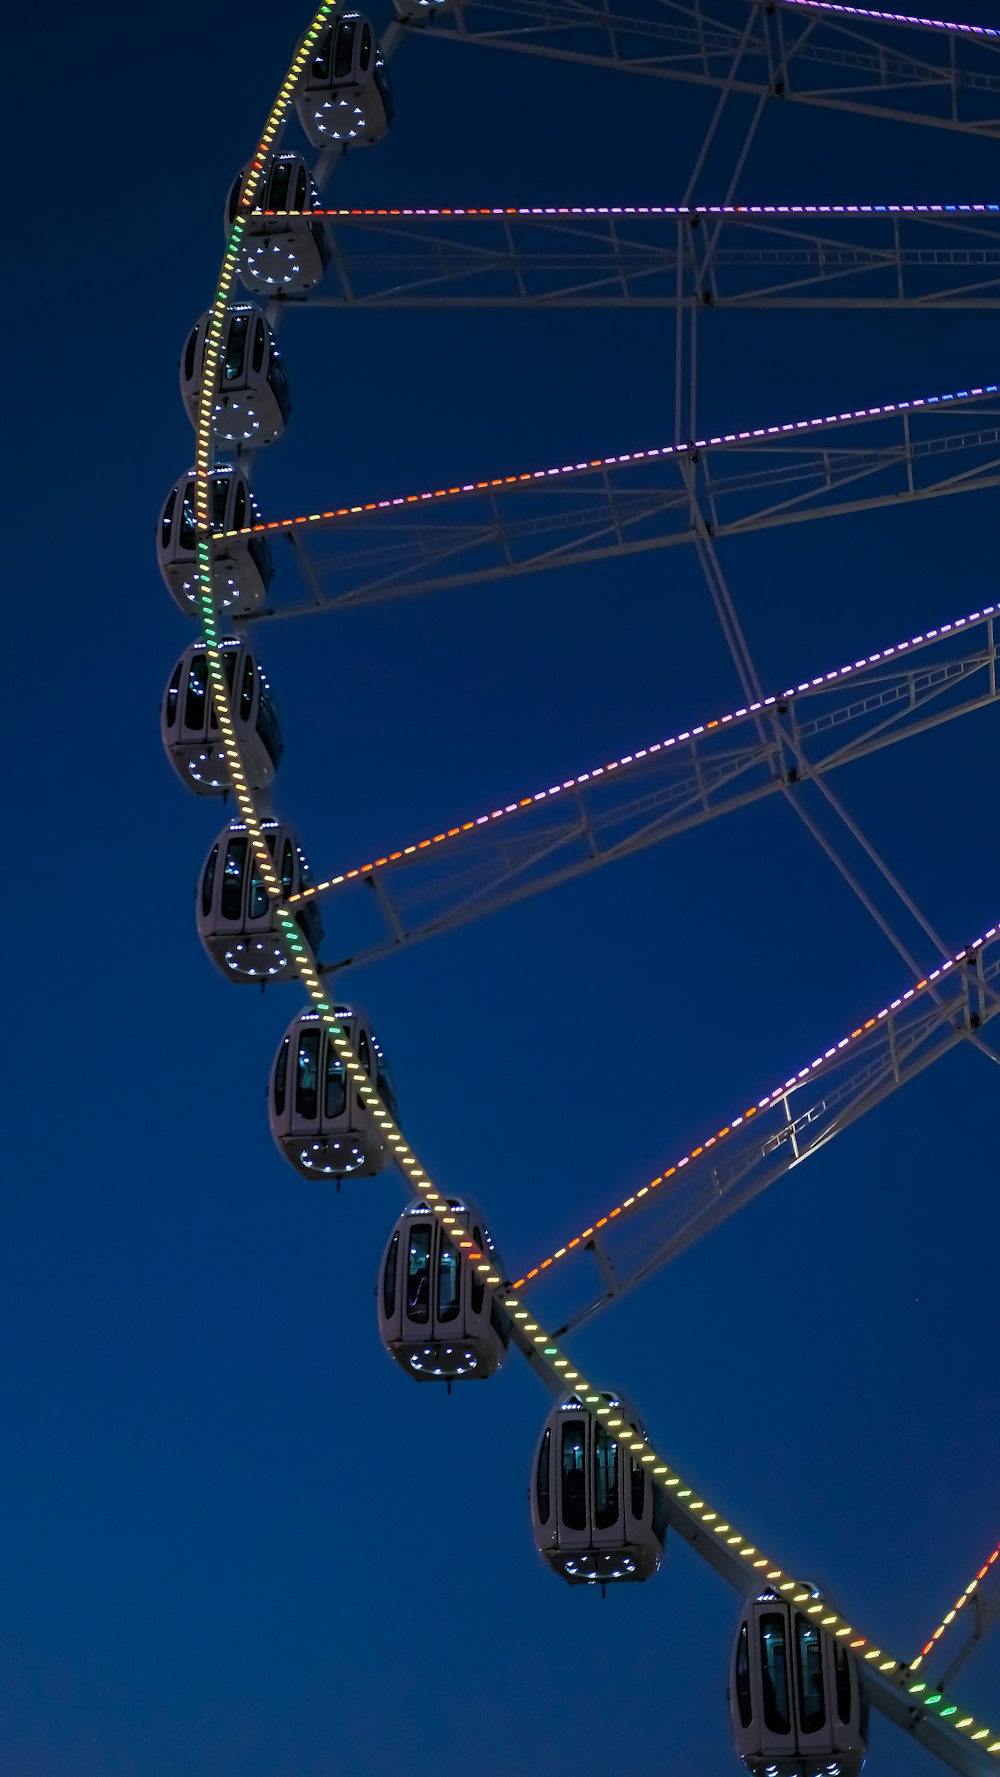 a ferris wheel lit up at night in the sky